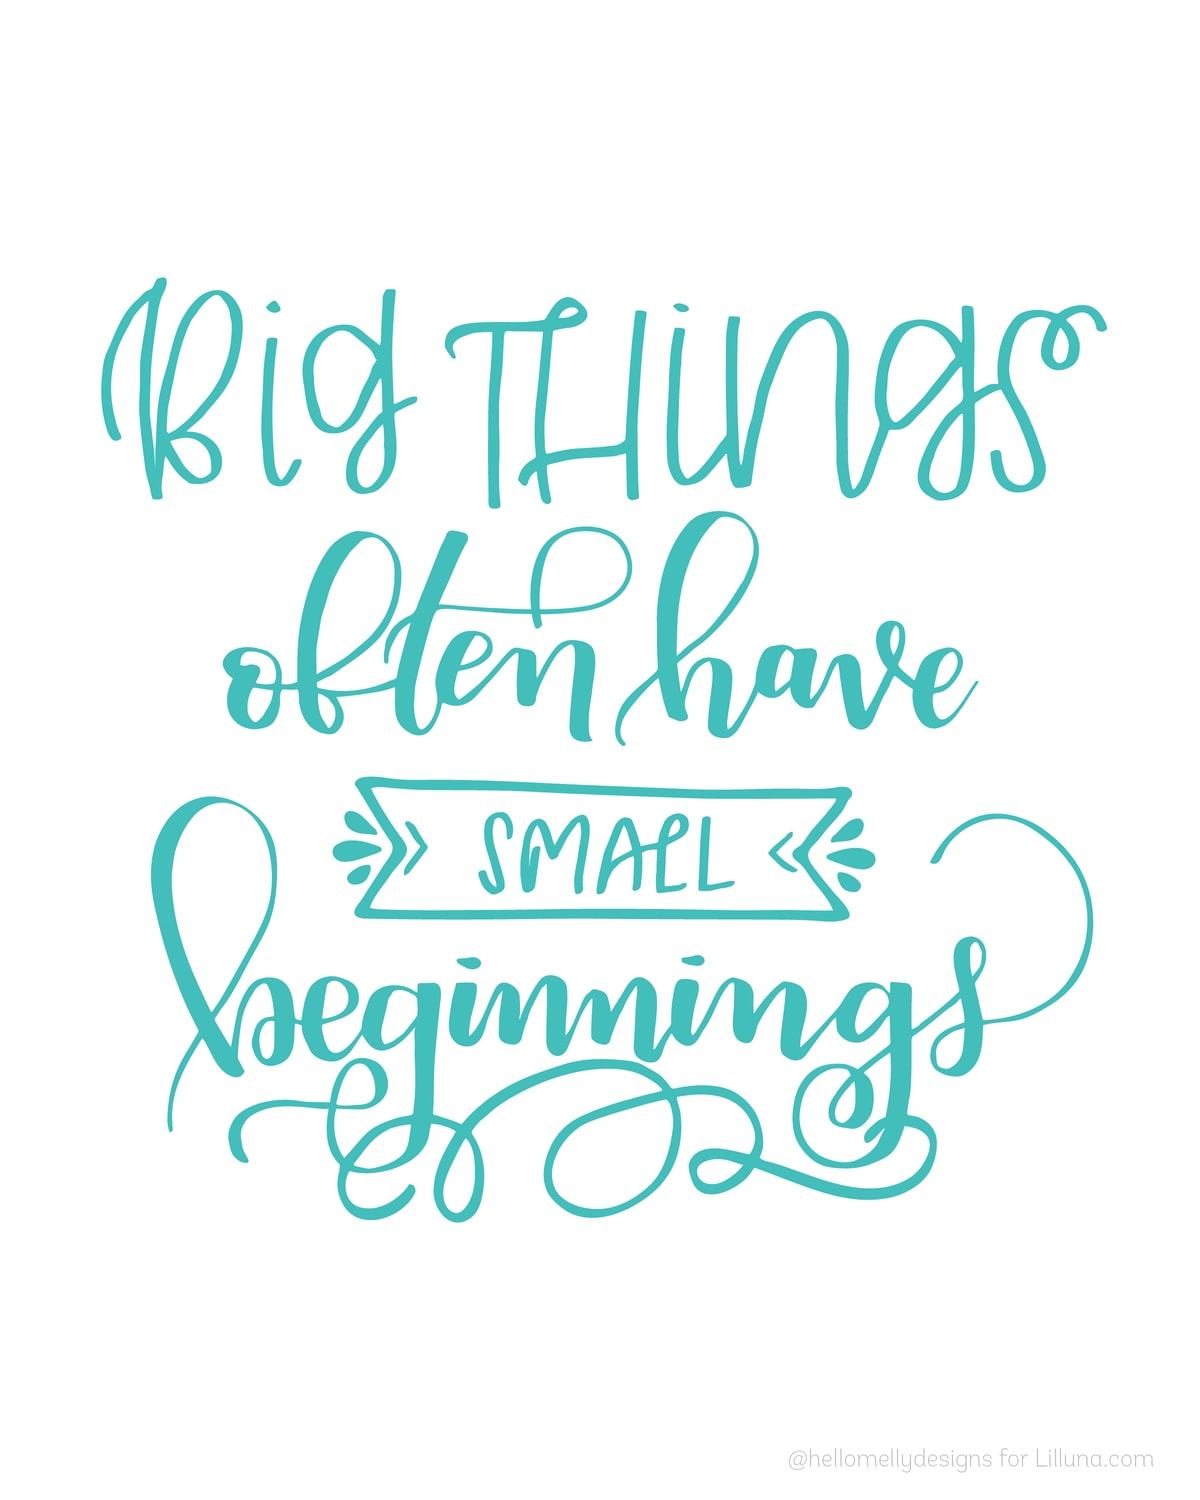 Big things often have small beginnings - LOVE this quote!! Get the free print on lilluna.com. Stick in a frame and use for cute decor!!